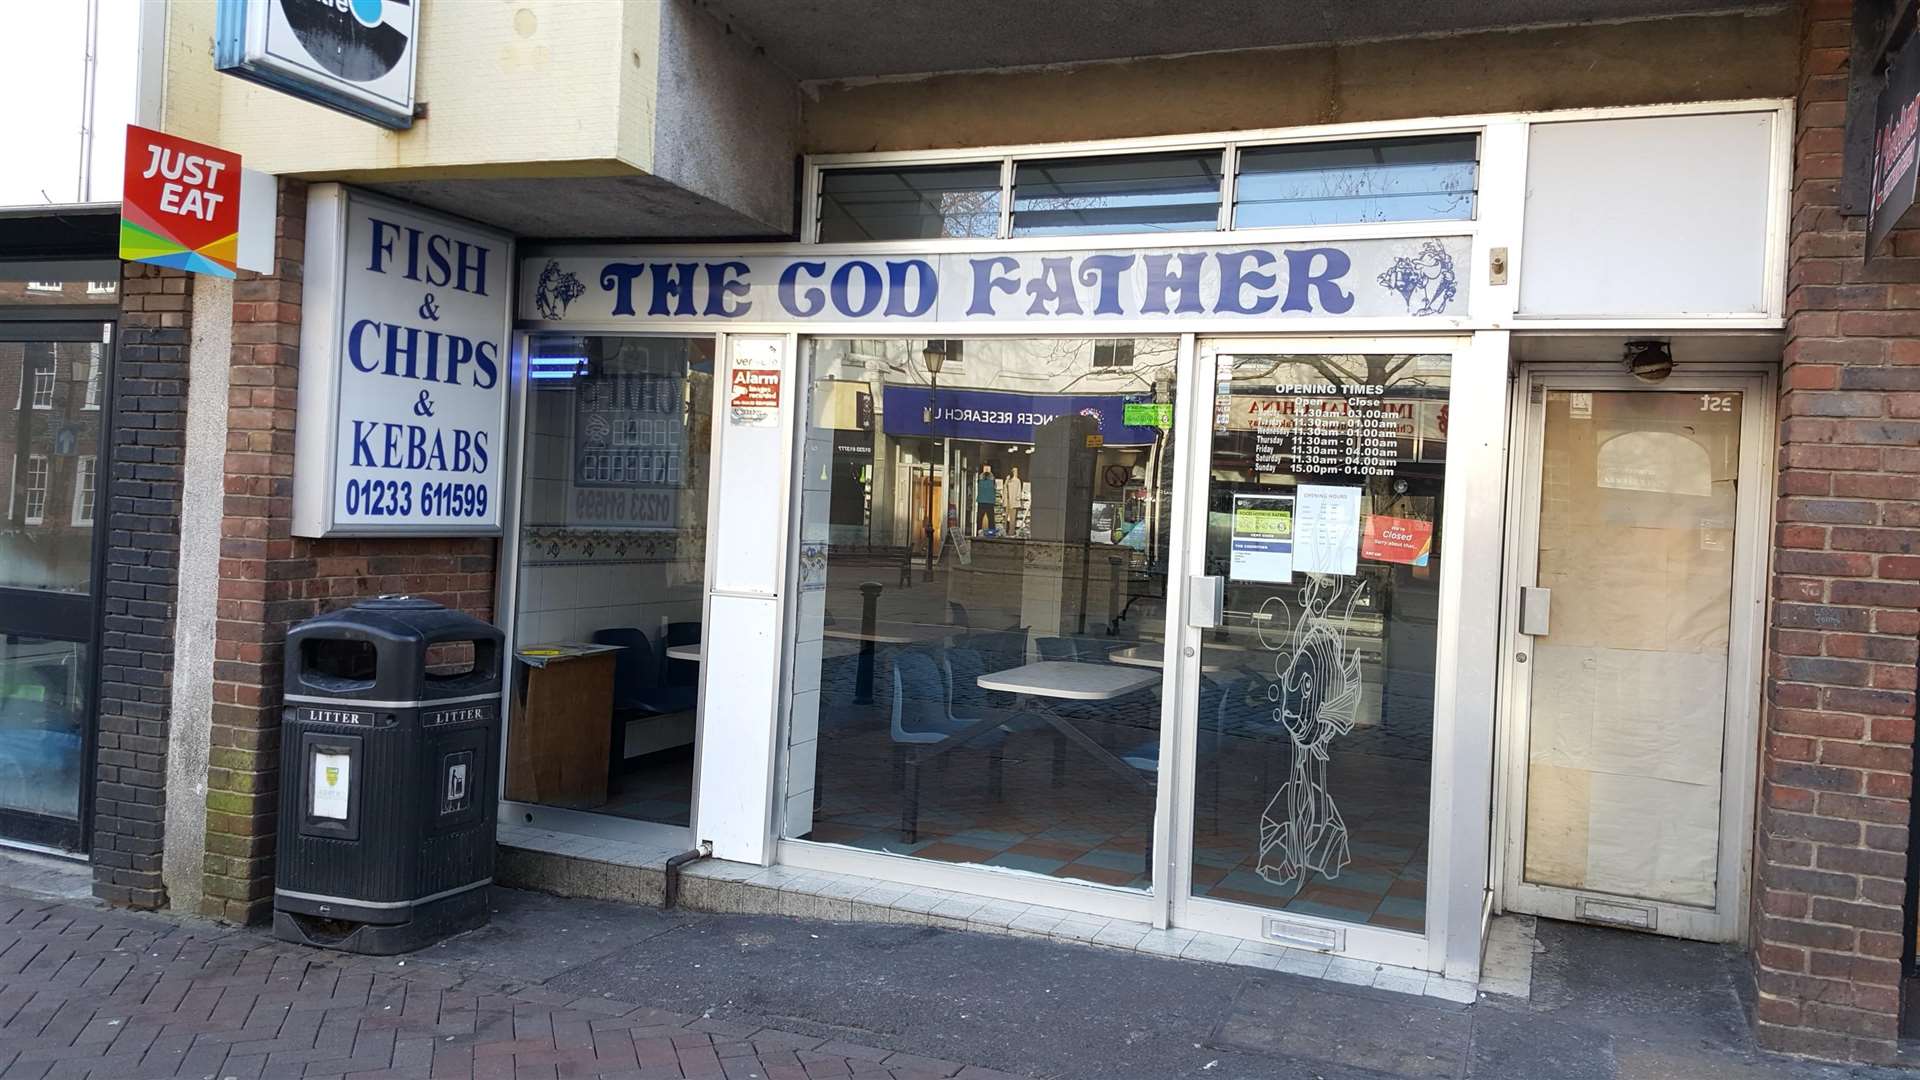 The Cod Father (6685656)